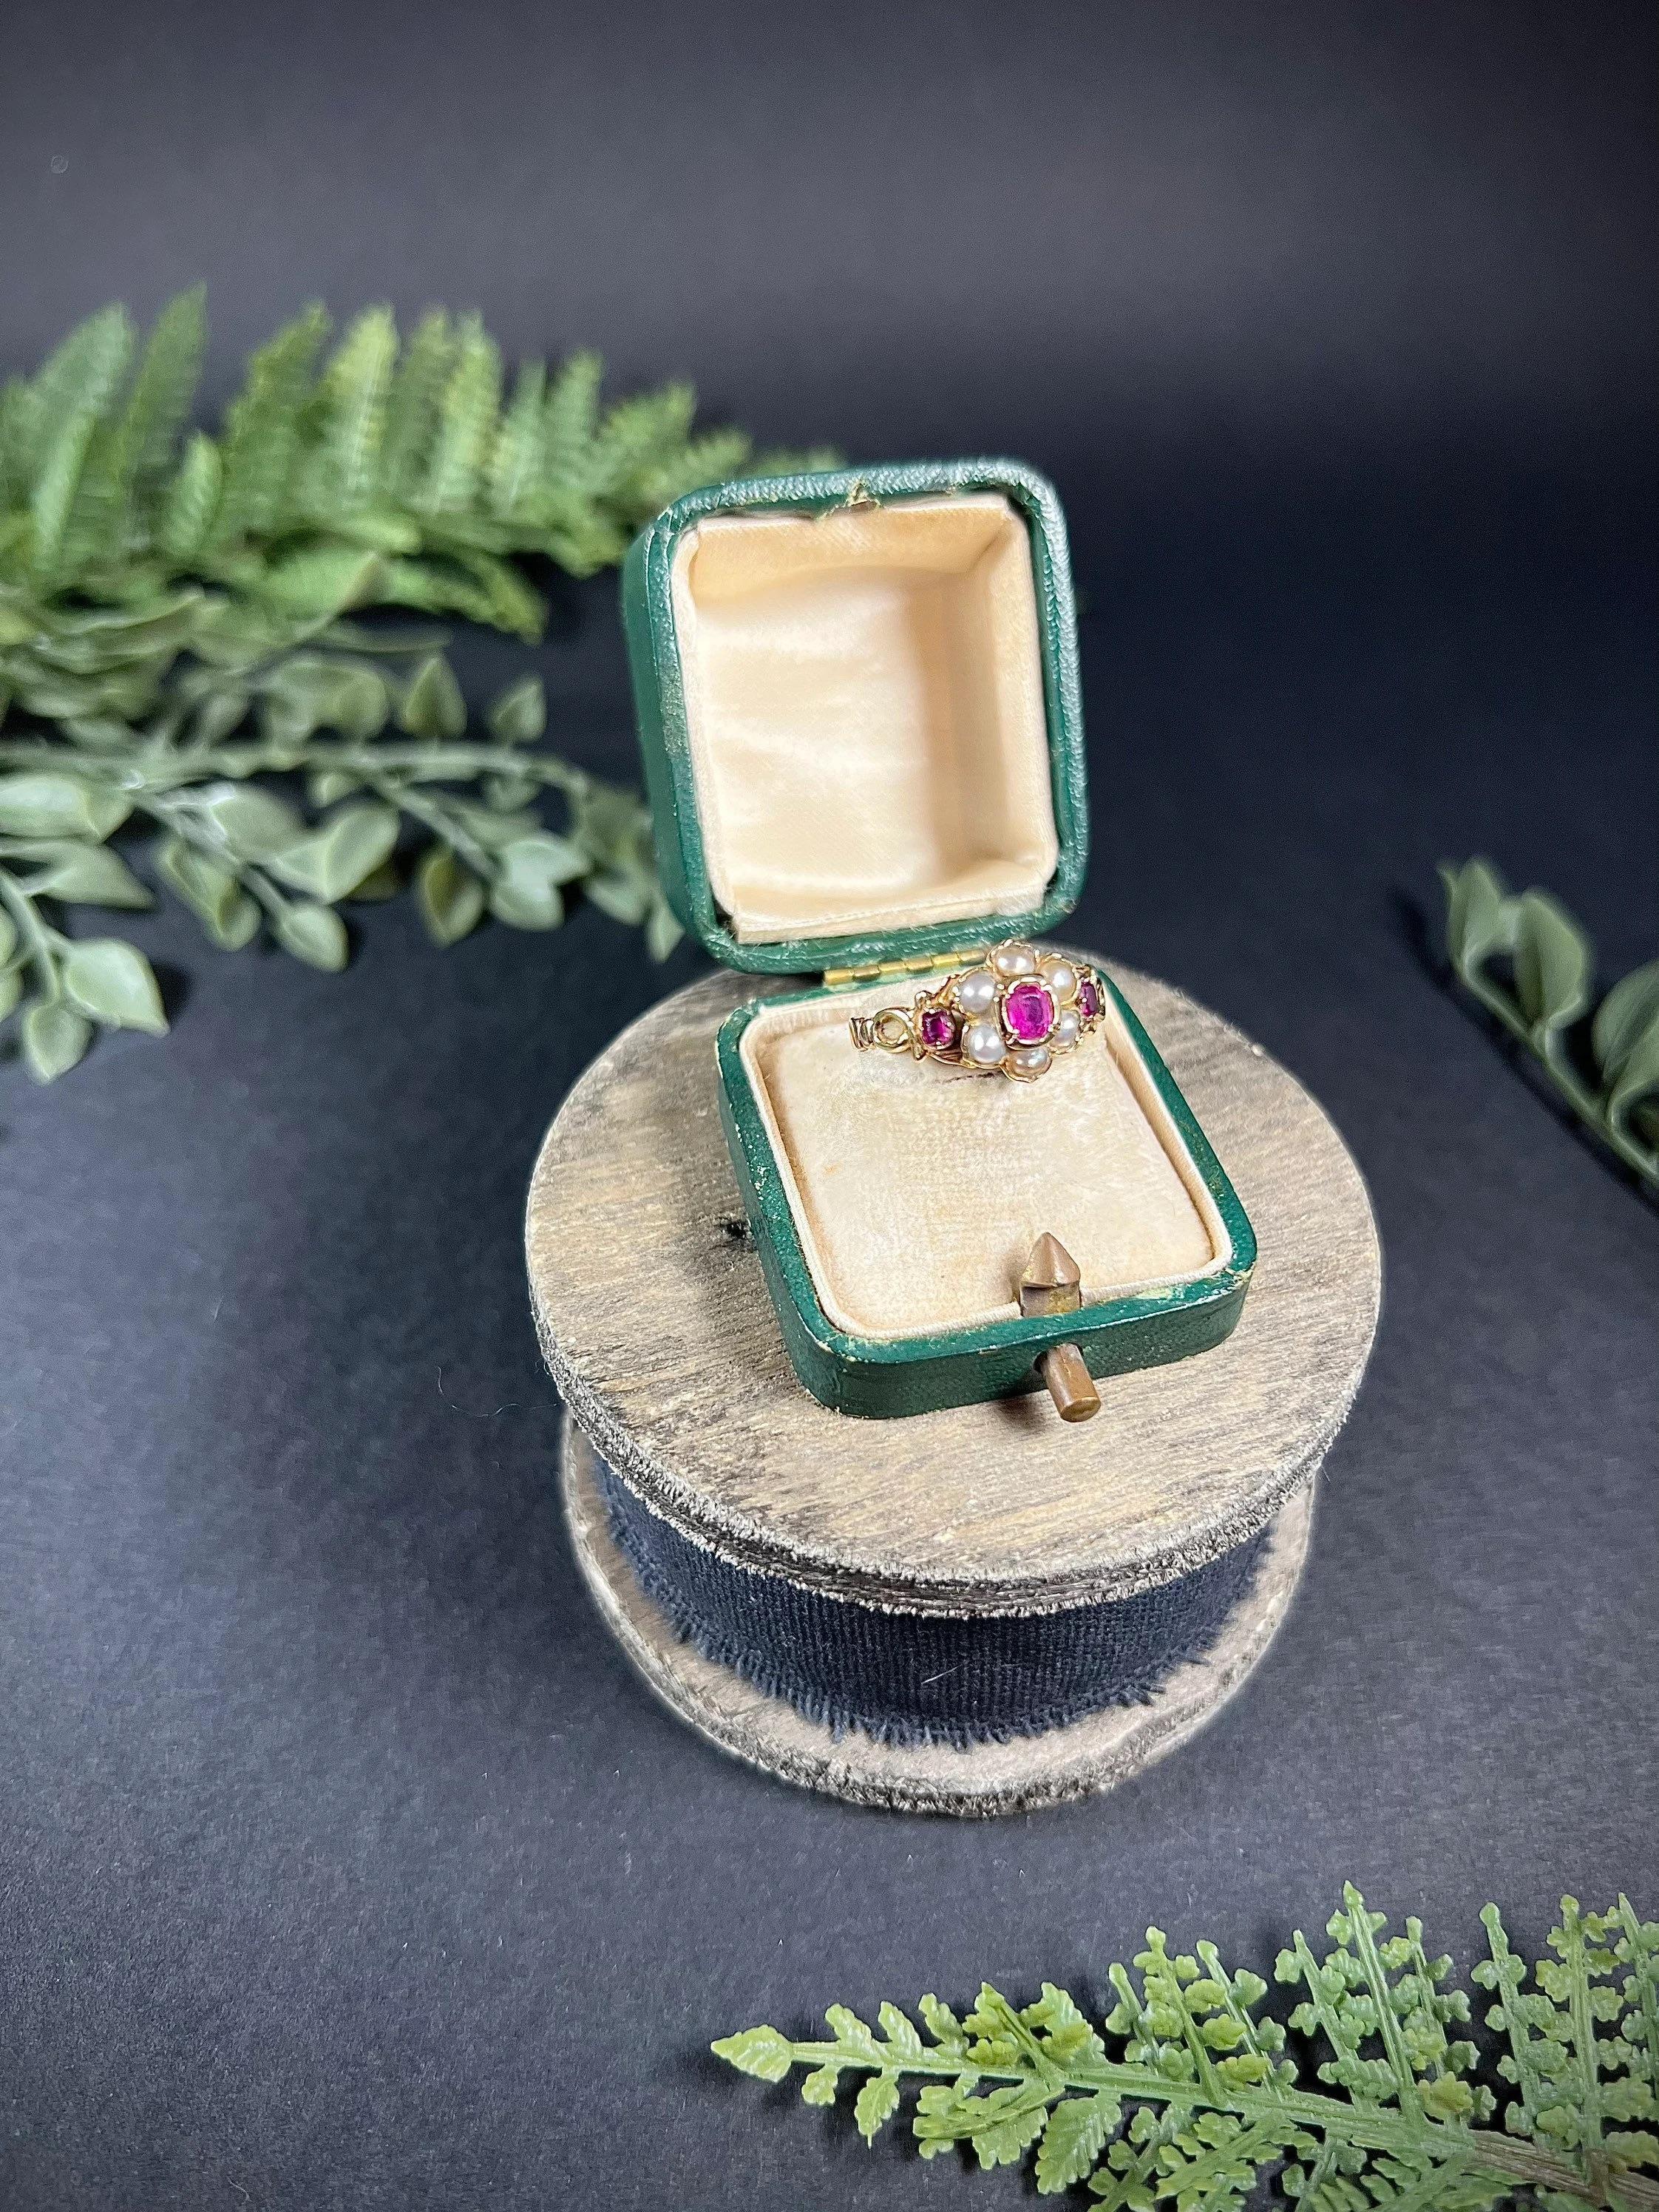 Antique Daisy Cluster Ring

15ct Gold Tested 

Circa 1880

Pretty, Victorian cluster ring. Set with an oval, faceted, natural ruby centre & a cluster of natural, milky seed pearls making a beautiful daisy formation. 
The ring features fabulous gold